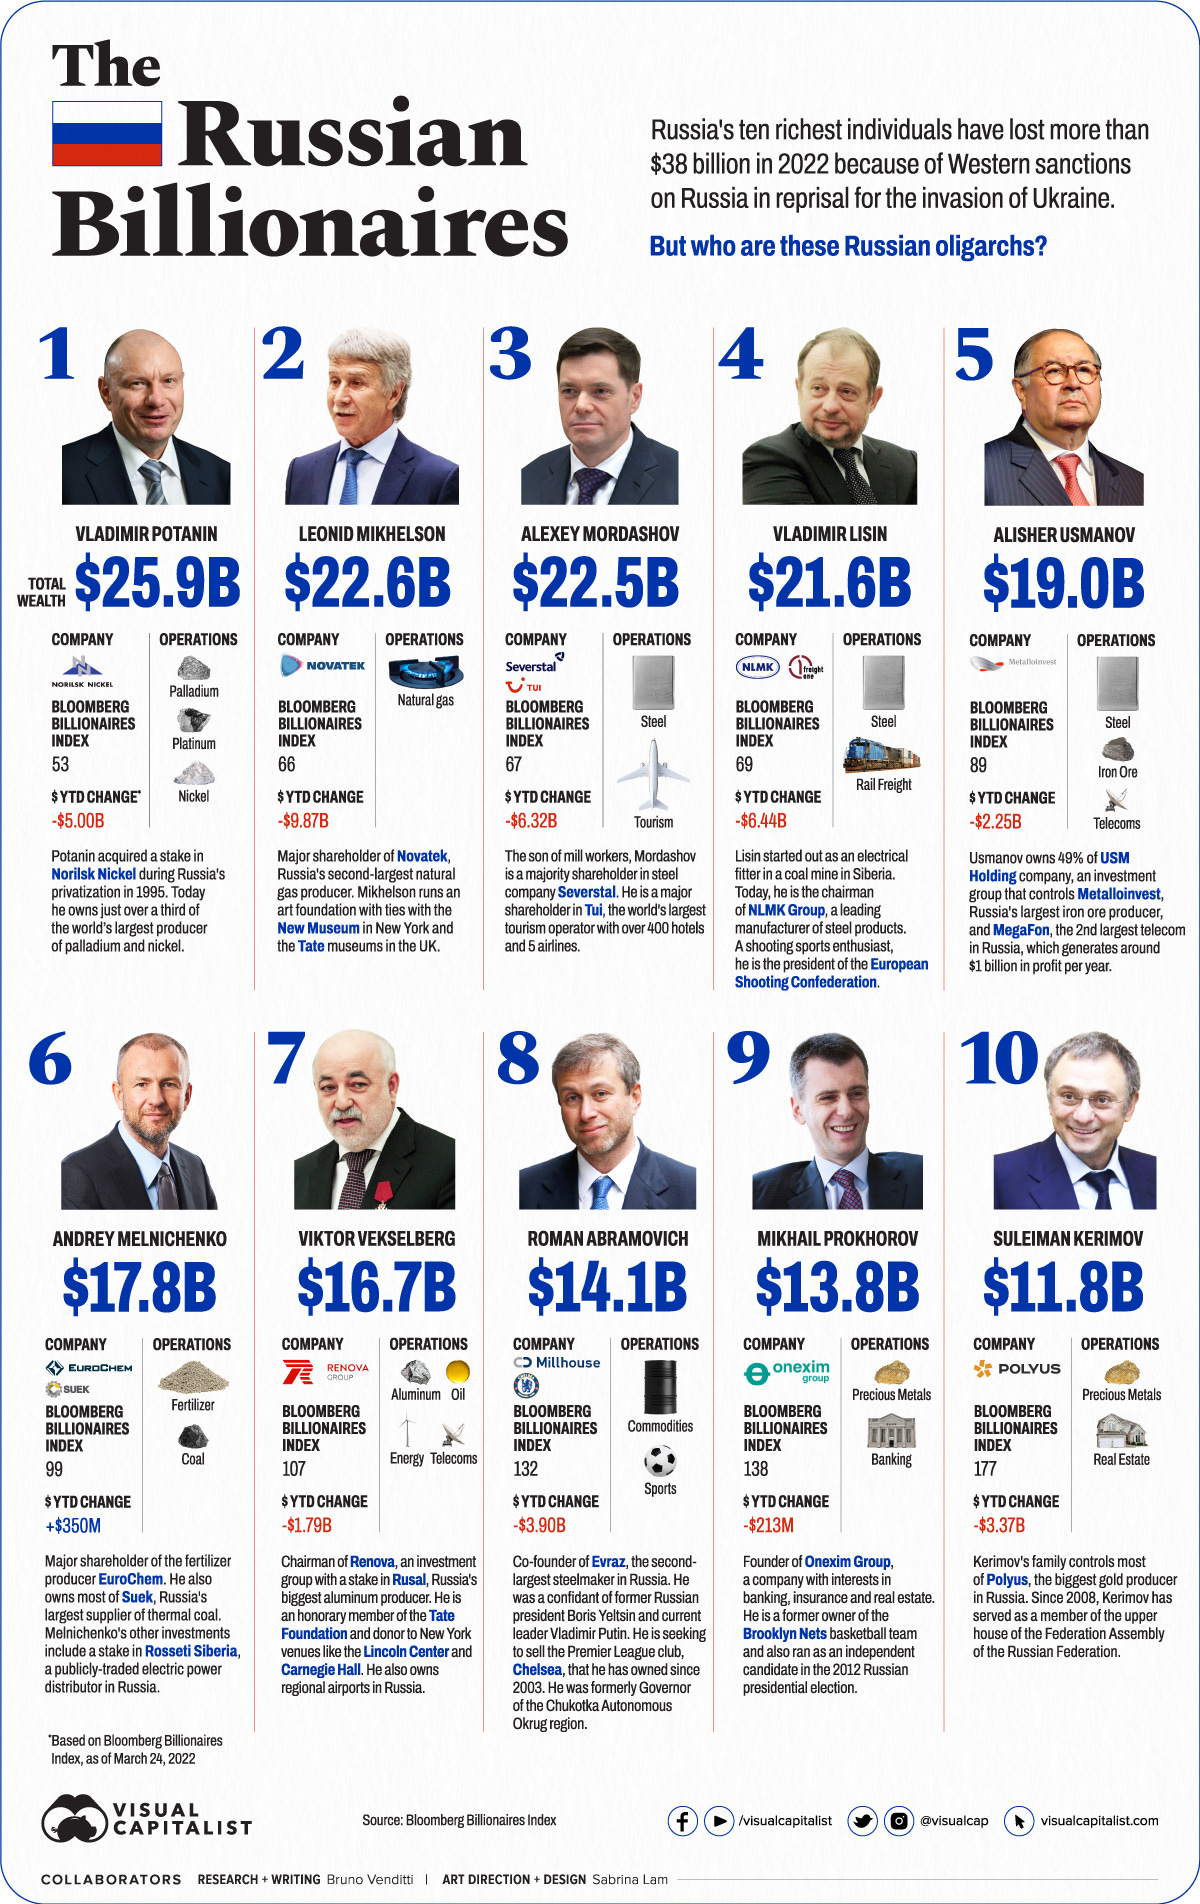 Who are the Russian Oligarchs?